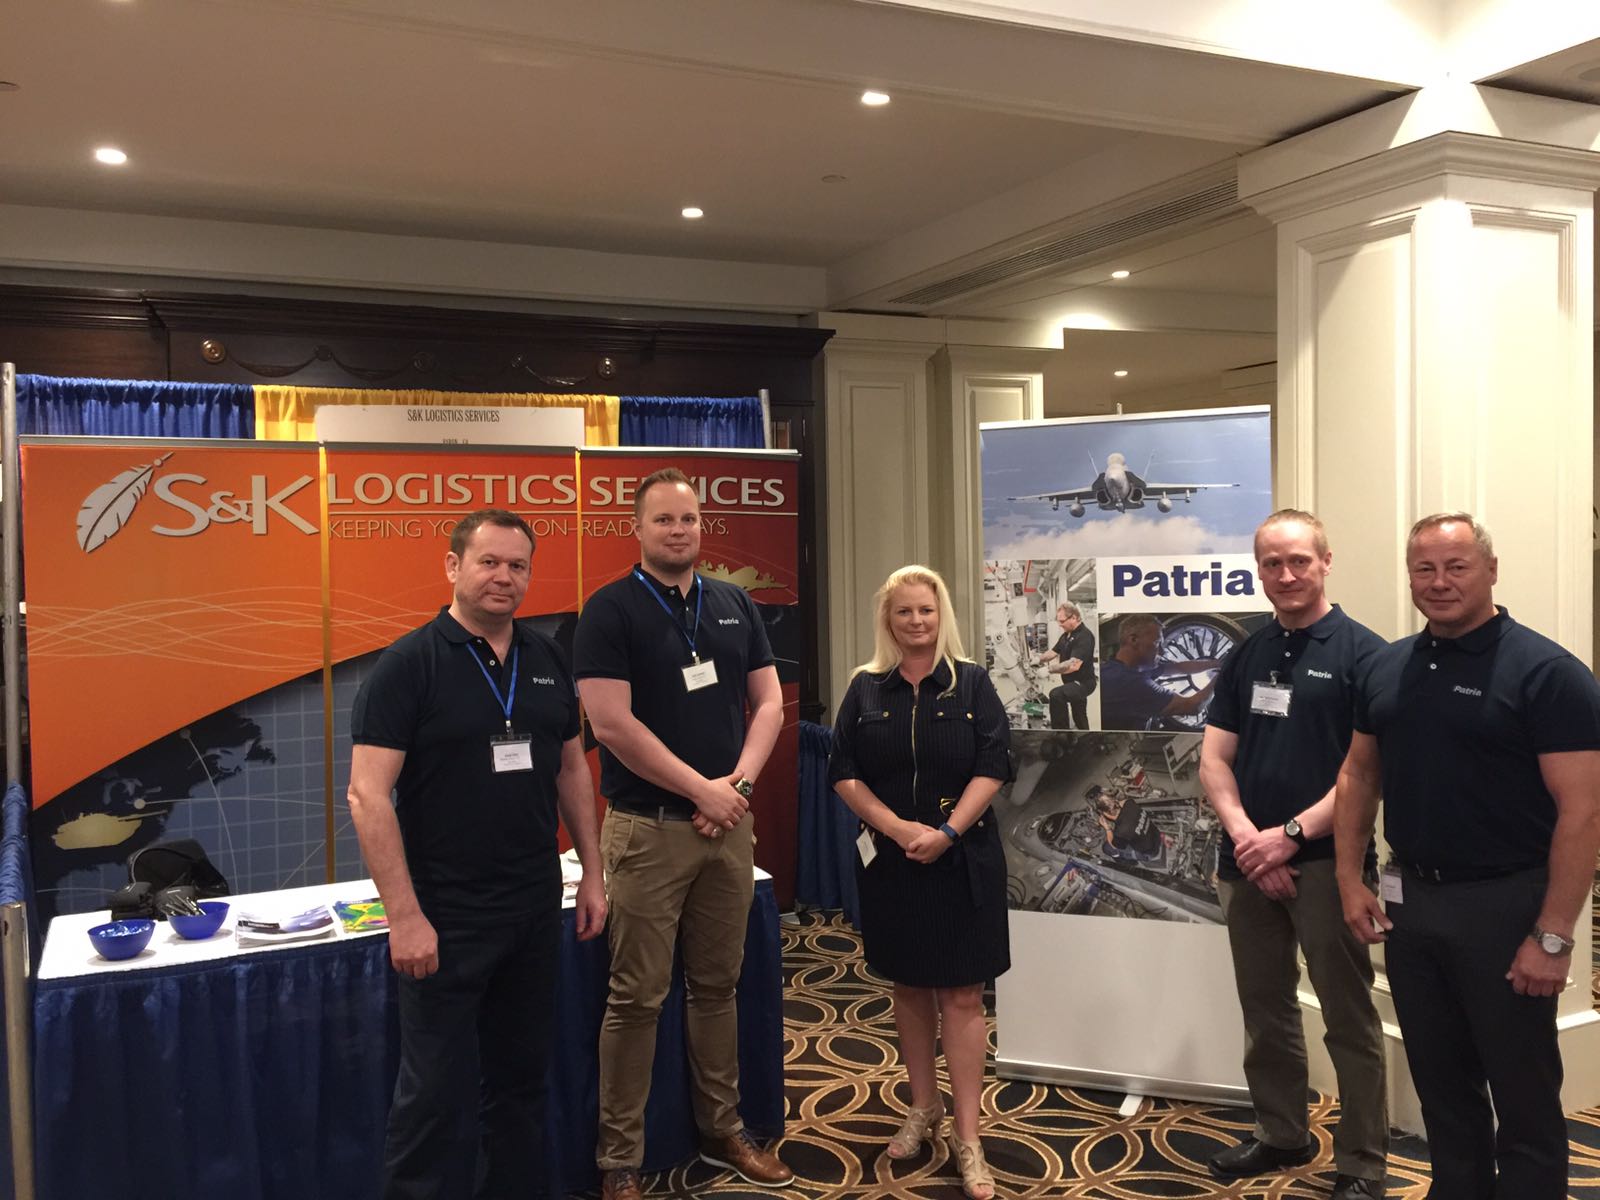 Patria and S&K Logistic Services were showcasing their F/A-18 Landing gear overhaul as well as their other services at The Naval International Aviation Logistics Process Improvement Team (LPIT) Workshop 9-11 May in Louisville, Kentucky, USA. In the photo LPIT-team: Janne Tanni, Antti Salmela, Gail Schmer, Marko Karhunen and Tuure Hakavuori.